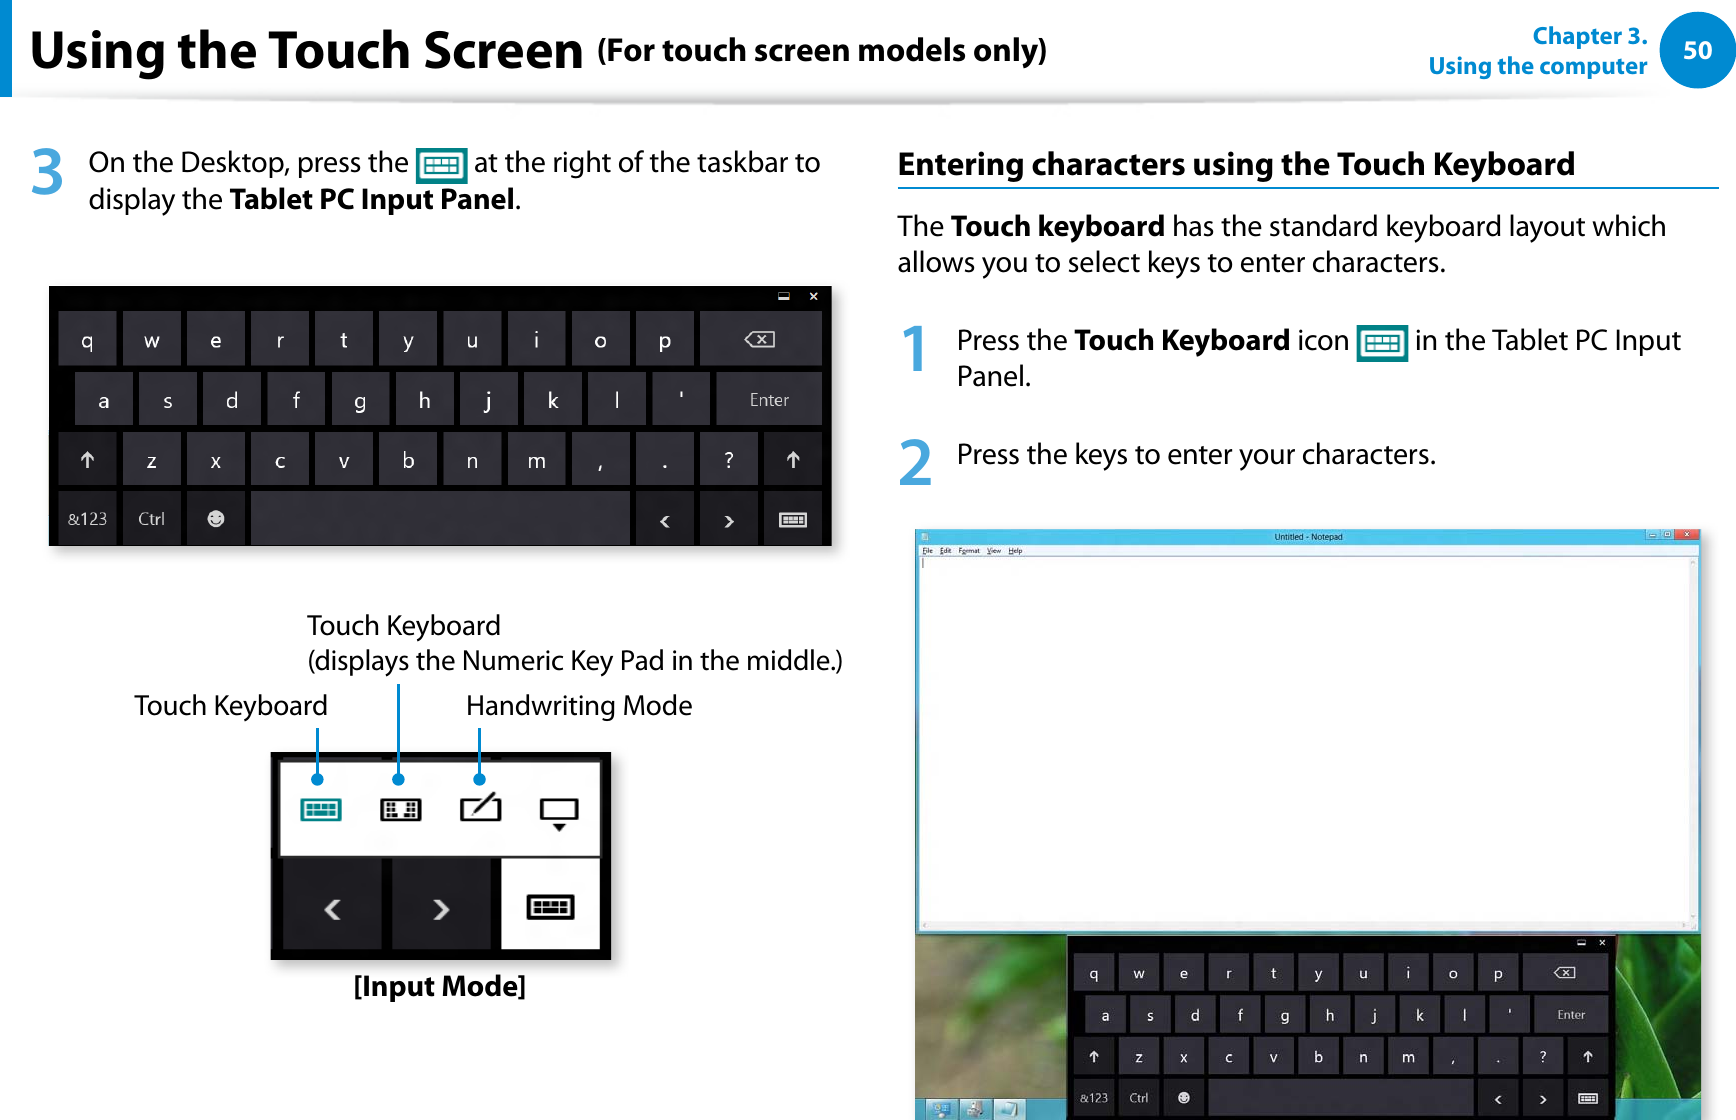 50Chapter 3.  Using the computerUsing the Touch Screen (For touch screen models only)3  On the Desktop, press the   at the right of the taskbar to display the Tablet PC Input Panel.Touch KeyboardTouch Keyboard  (displays the Numeric Key Pad in the middle.)Handwriting Mode[Input Mode]Entering characters using the Touch KeyboardThe Touch keyboard has the standard keyboard layout which allows you to select keys to enter characters.1 Press the Touch Keyboard icon   in the Tablet PC Input Panel.2  Press the keys to enter your characters.